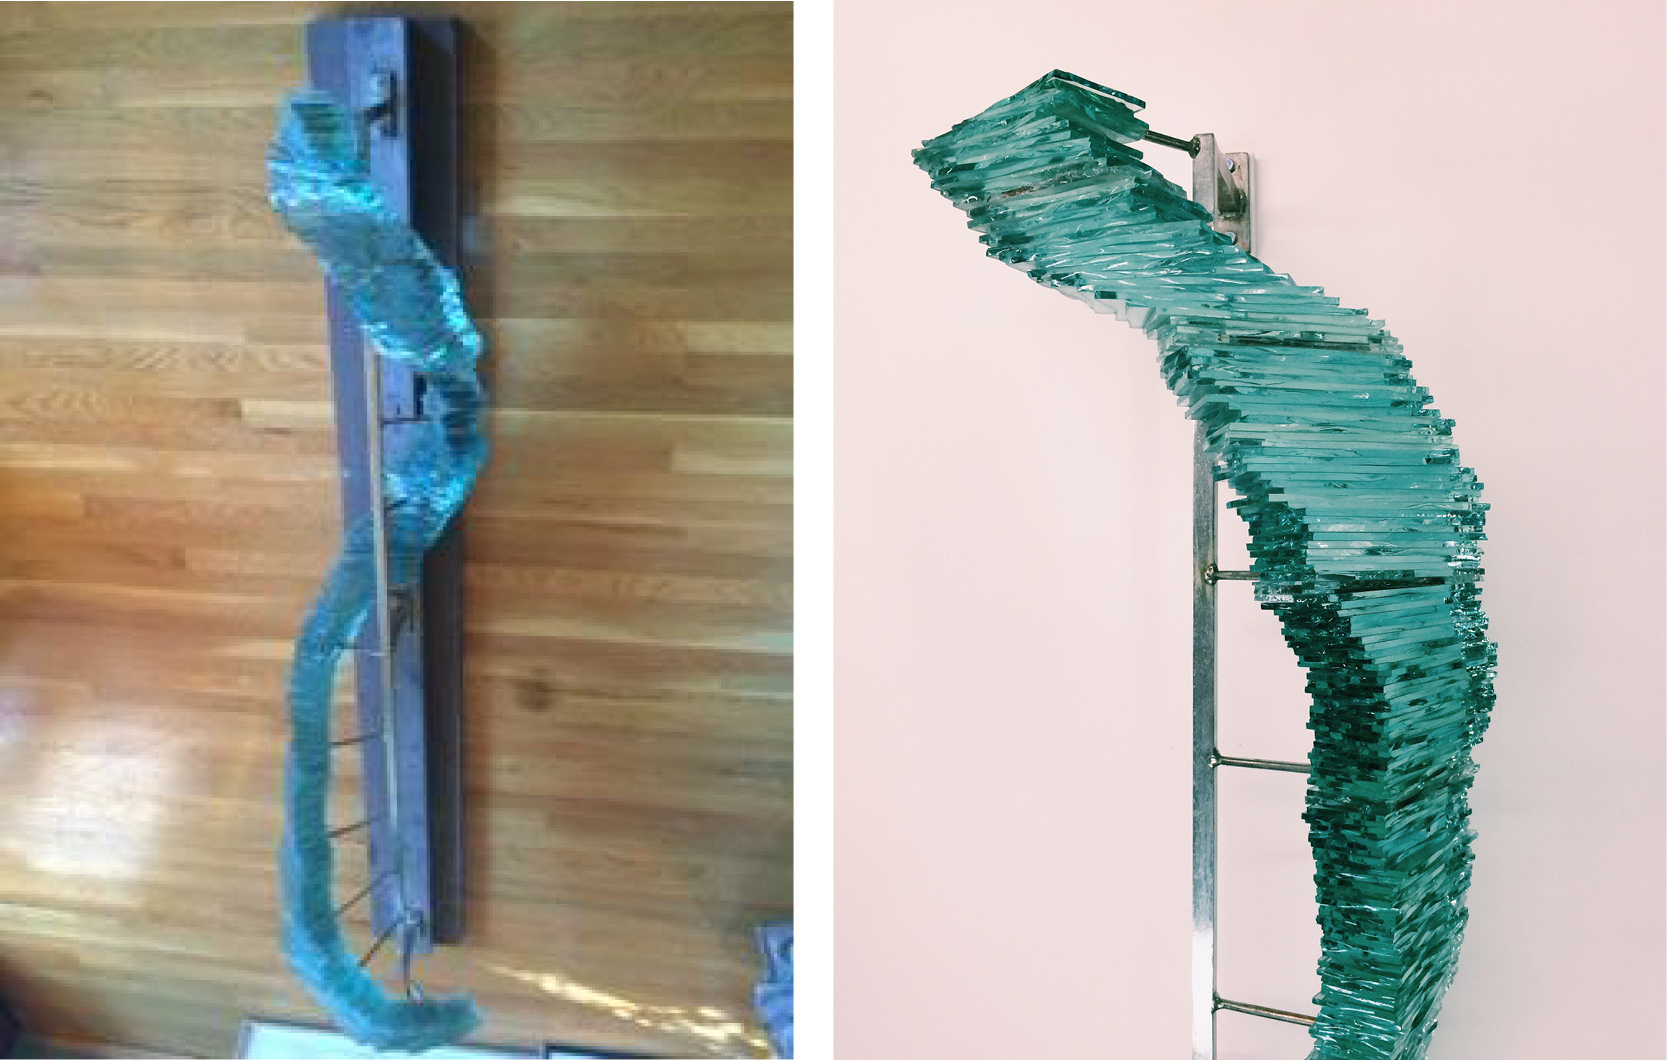 Before and after sculpture revitalization by Allison and Ross